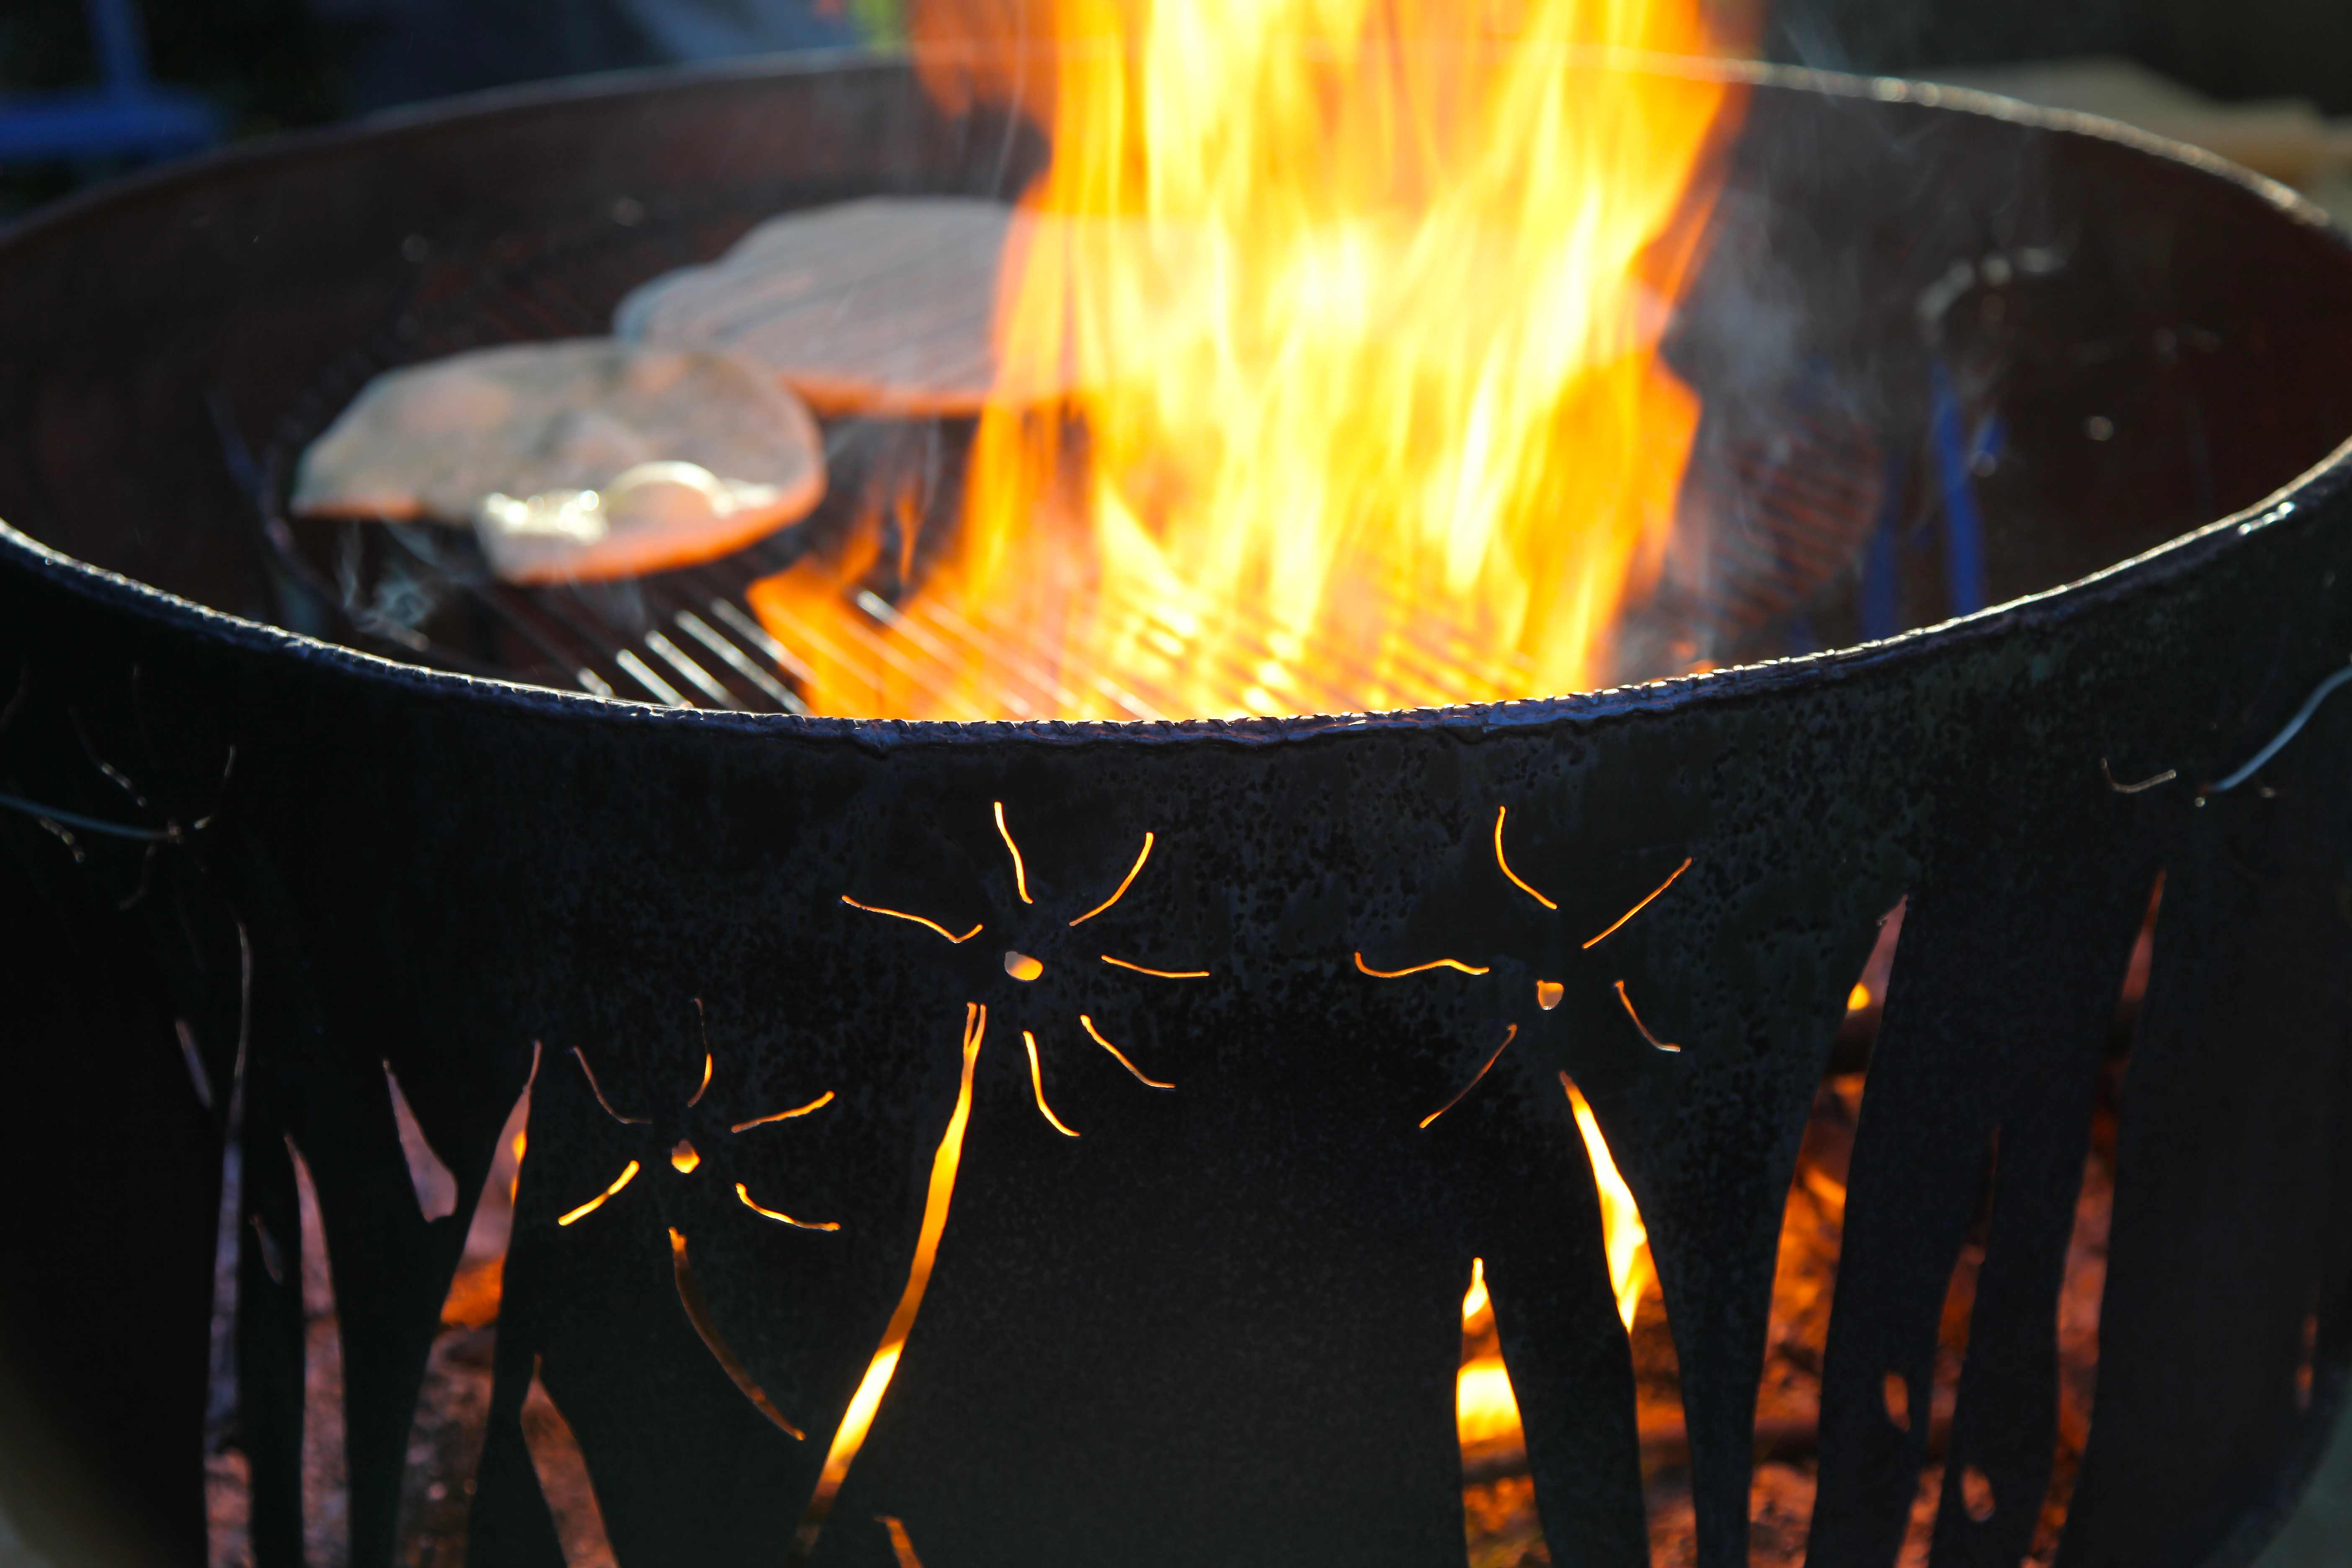 10 DIY Upcycled Fire Pits | Buy Nothing Project